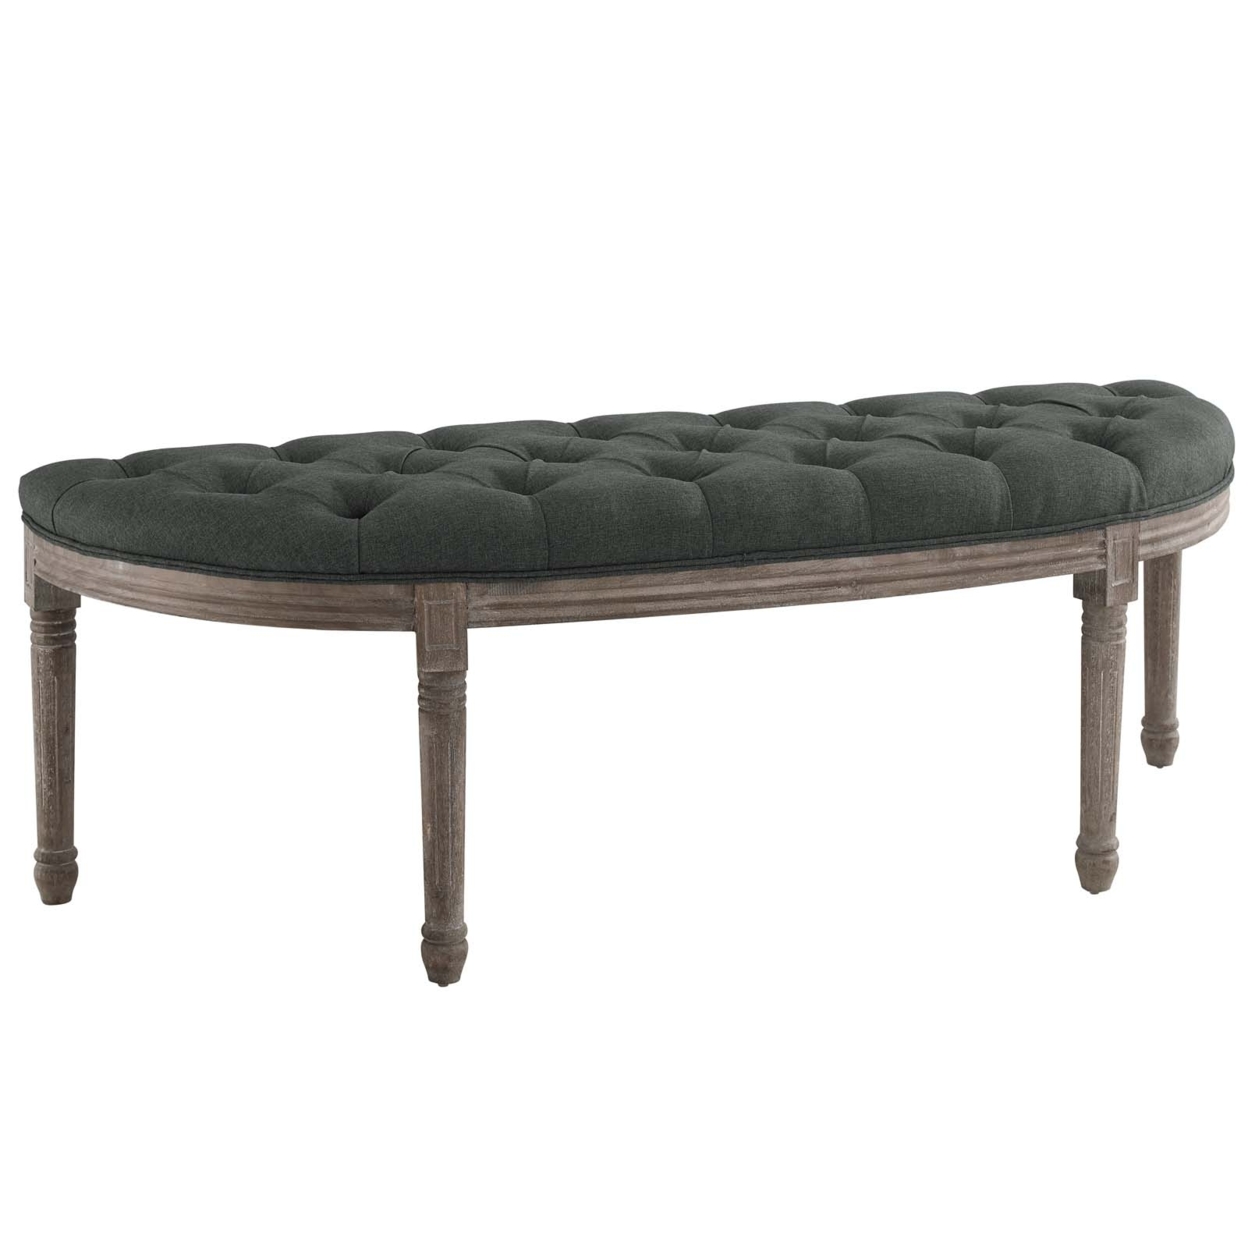 Esteem Vintage French Upholstered Fabric Semi-Circle Bench, Gray